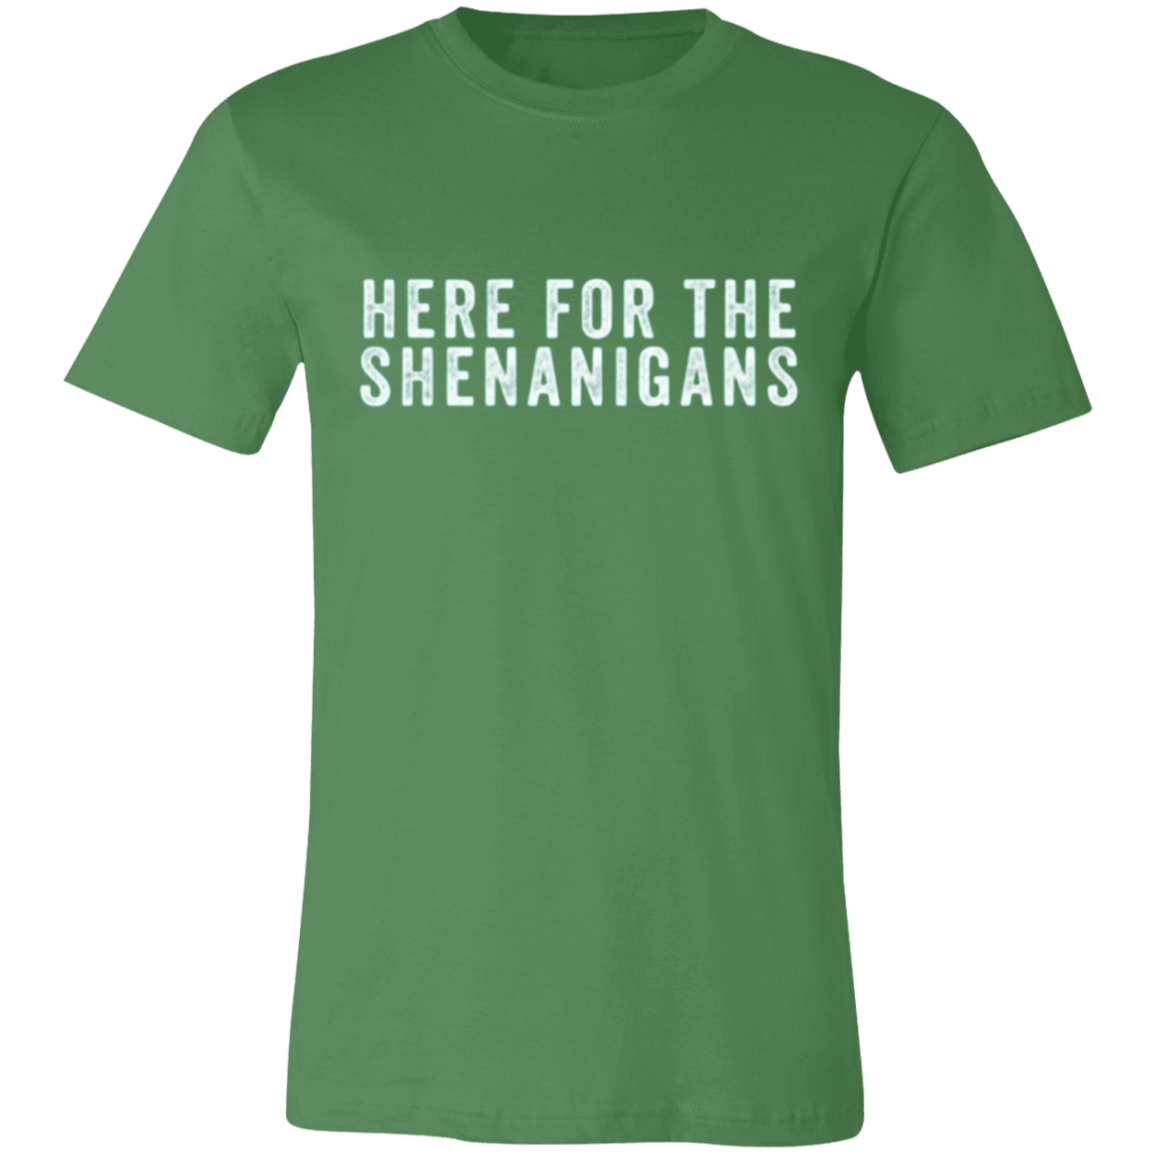 Here For the Shenanigans Tee